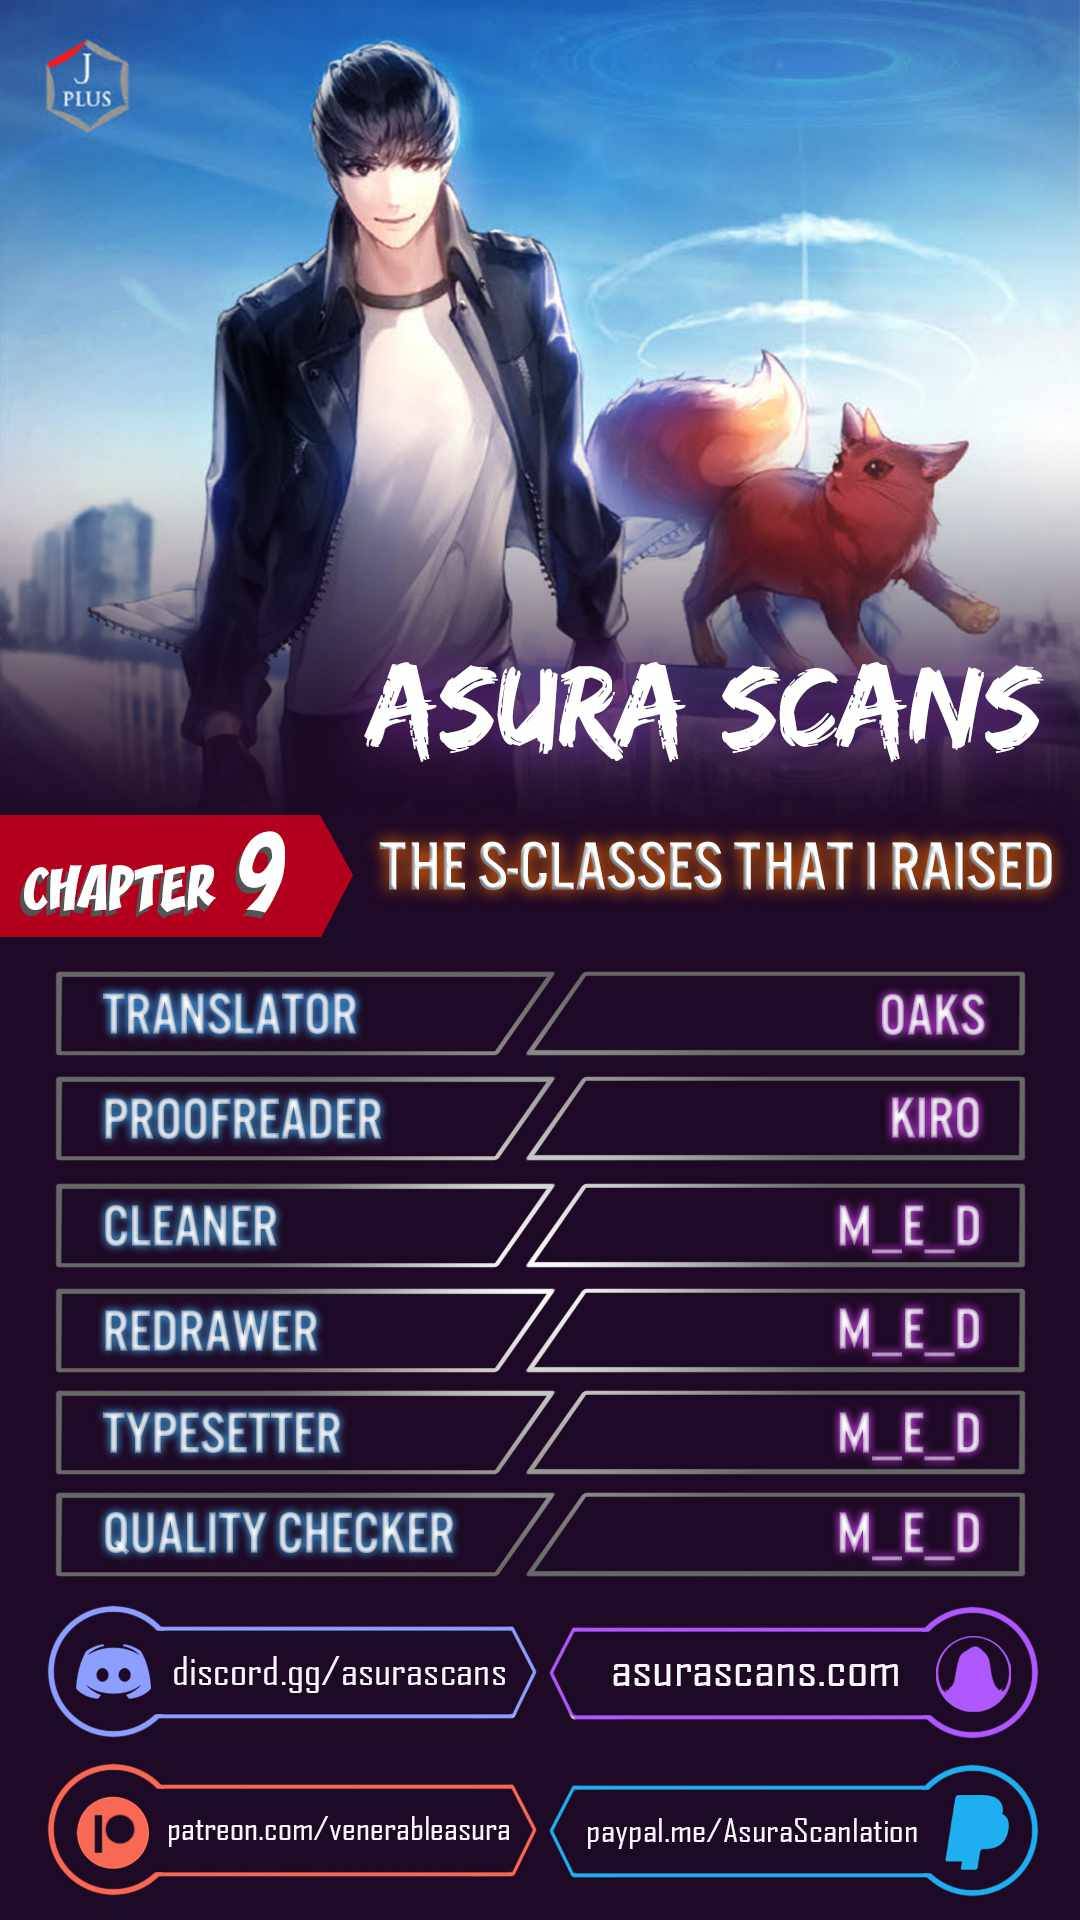 The S-Classes That I Raised chapter 9